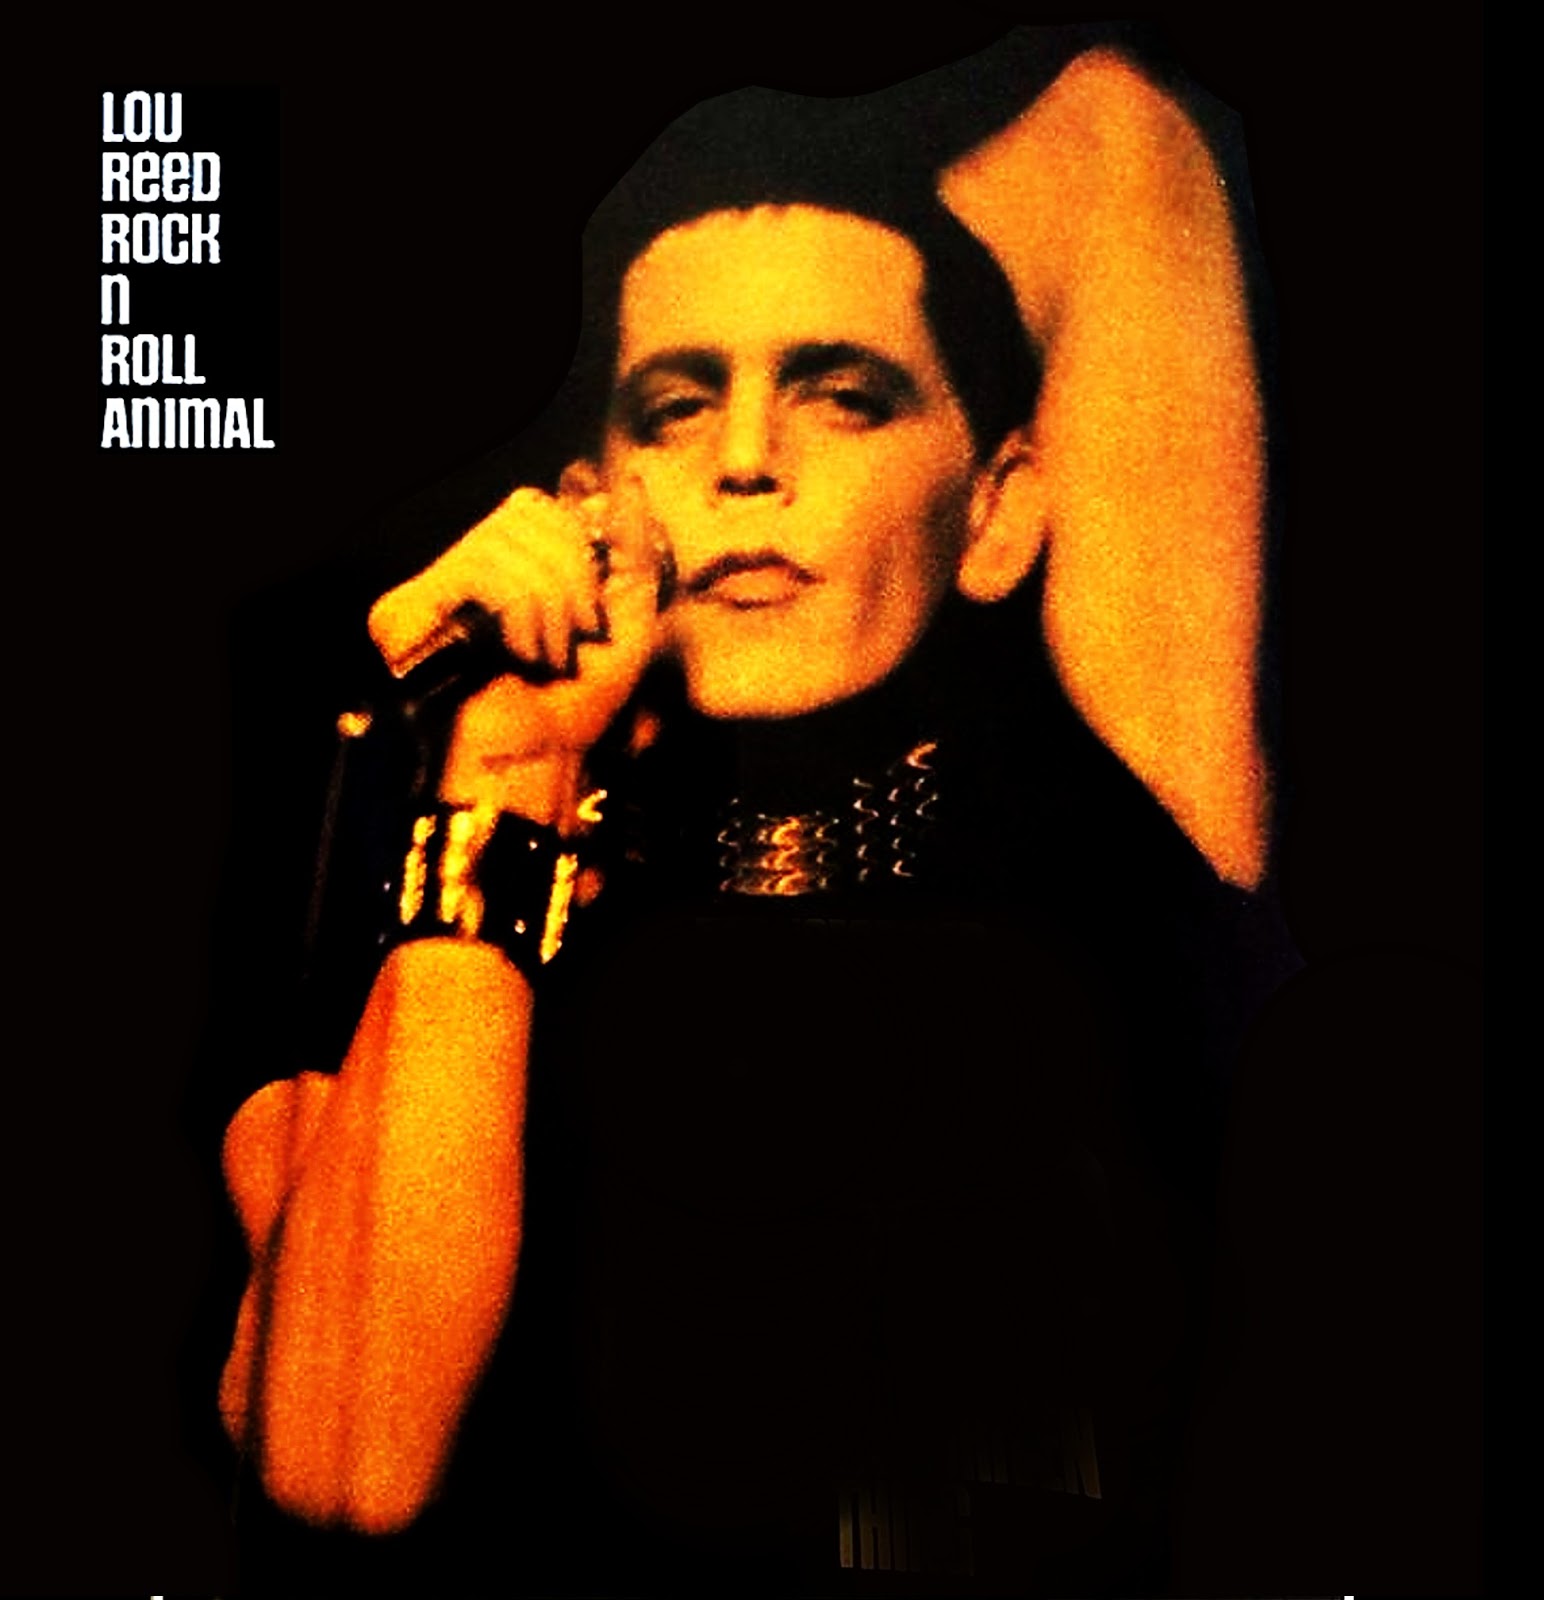 39+Lou+Reed+-+Rock+and+Roll+Animal.jpg